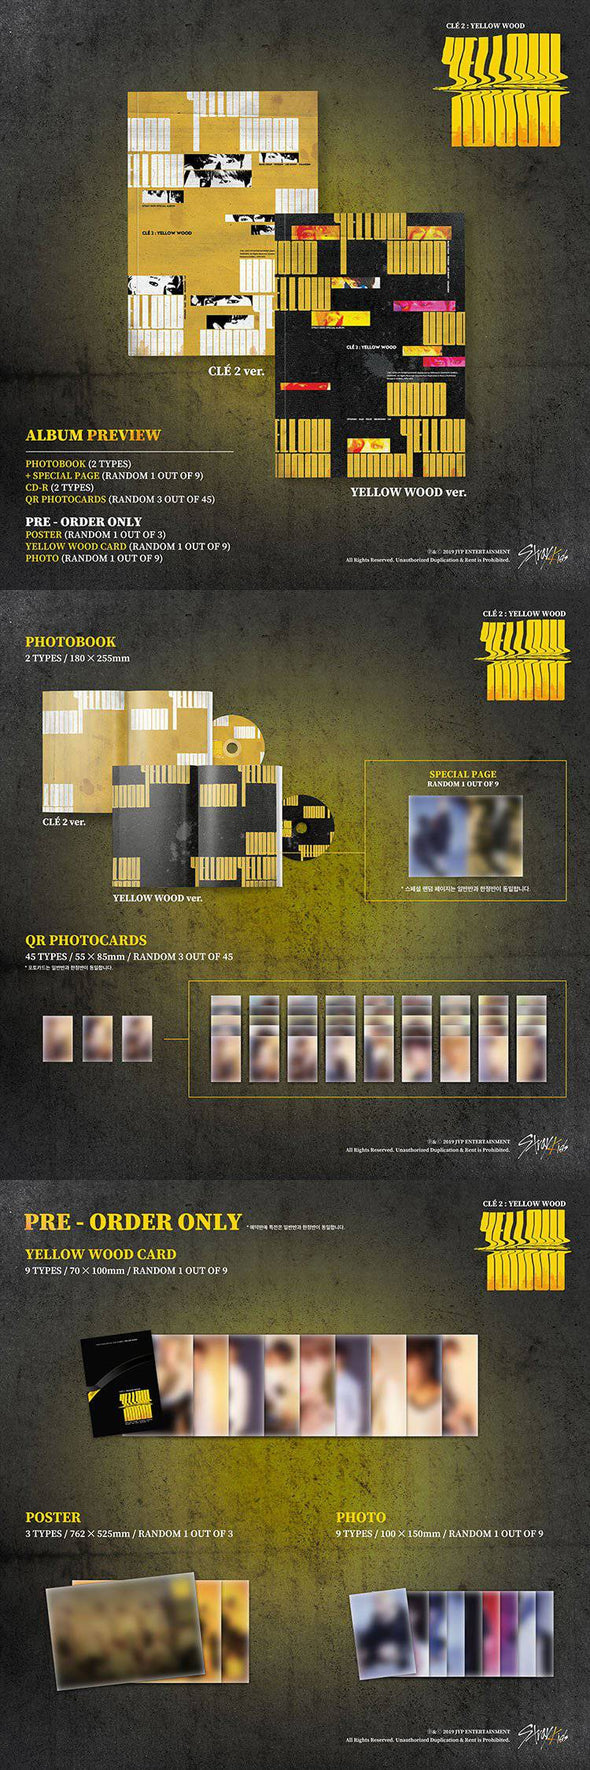 STRAY KIDS - [Cle 2 : Yellow Wood] Special Album - Kpop Music 사랑해요